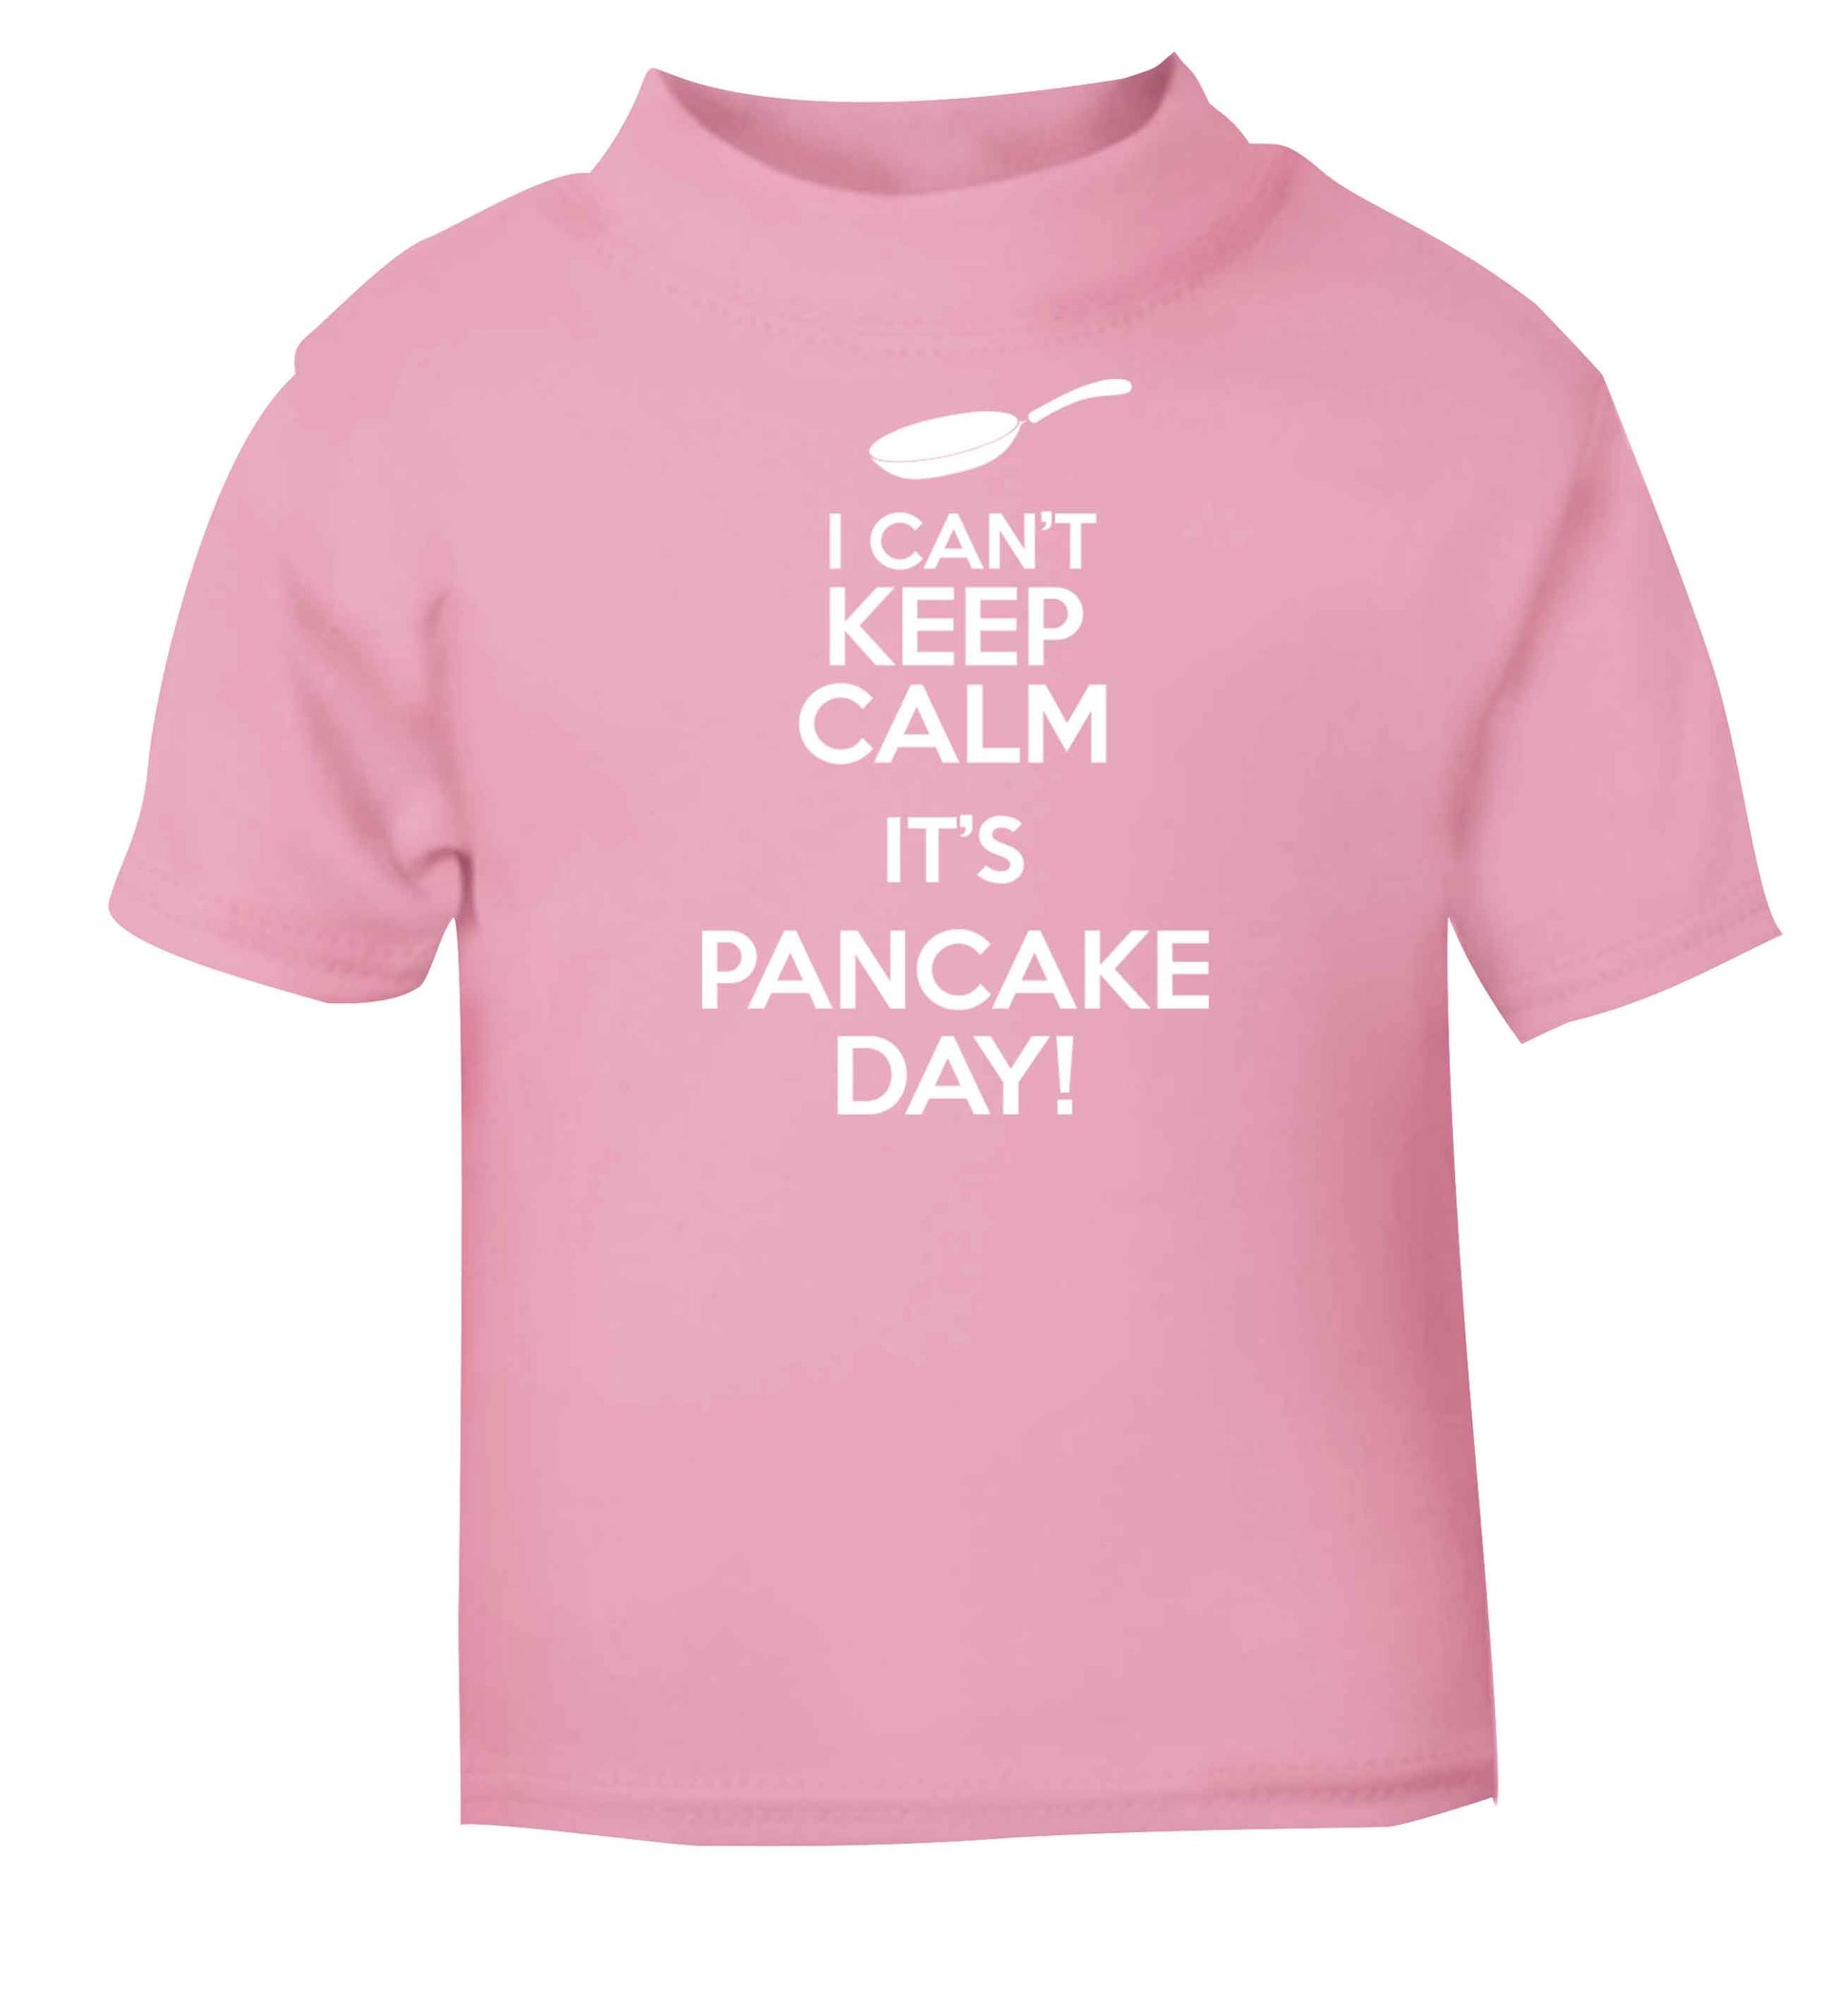 I can't keep calm it's pancake day! light pink baby toddler Tshirt 2 Years